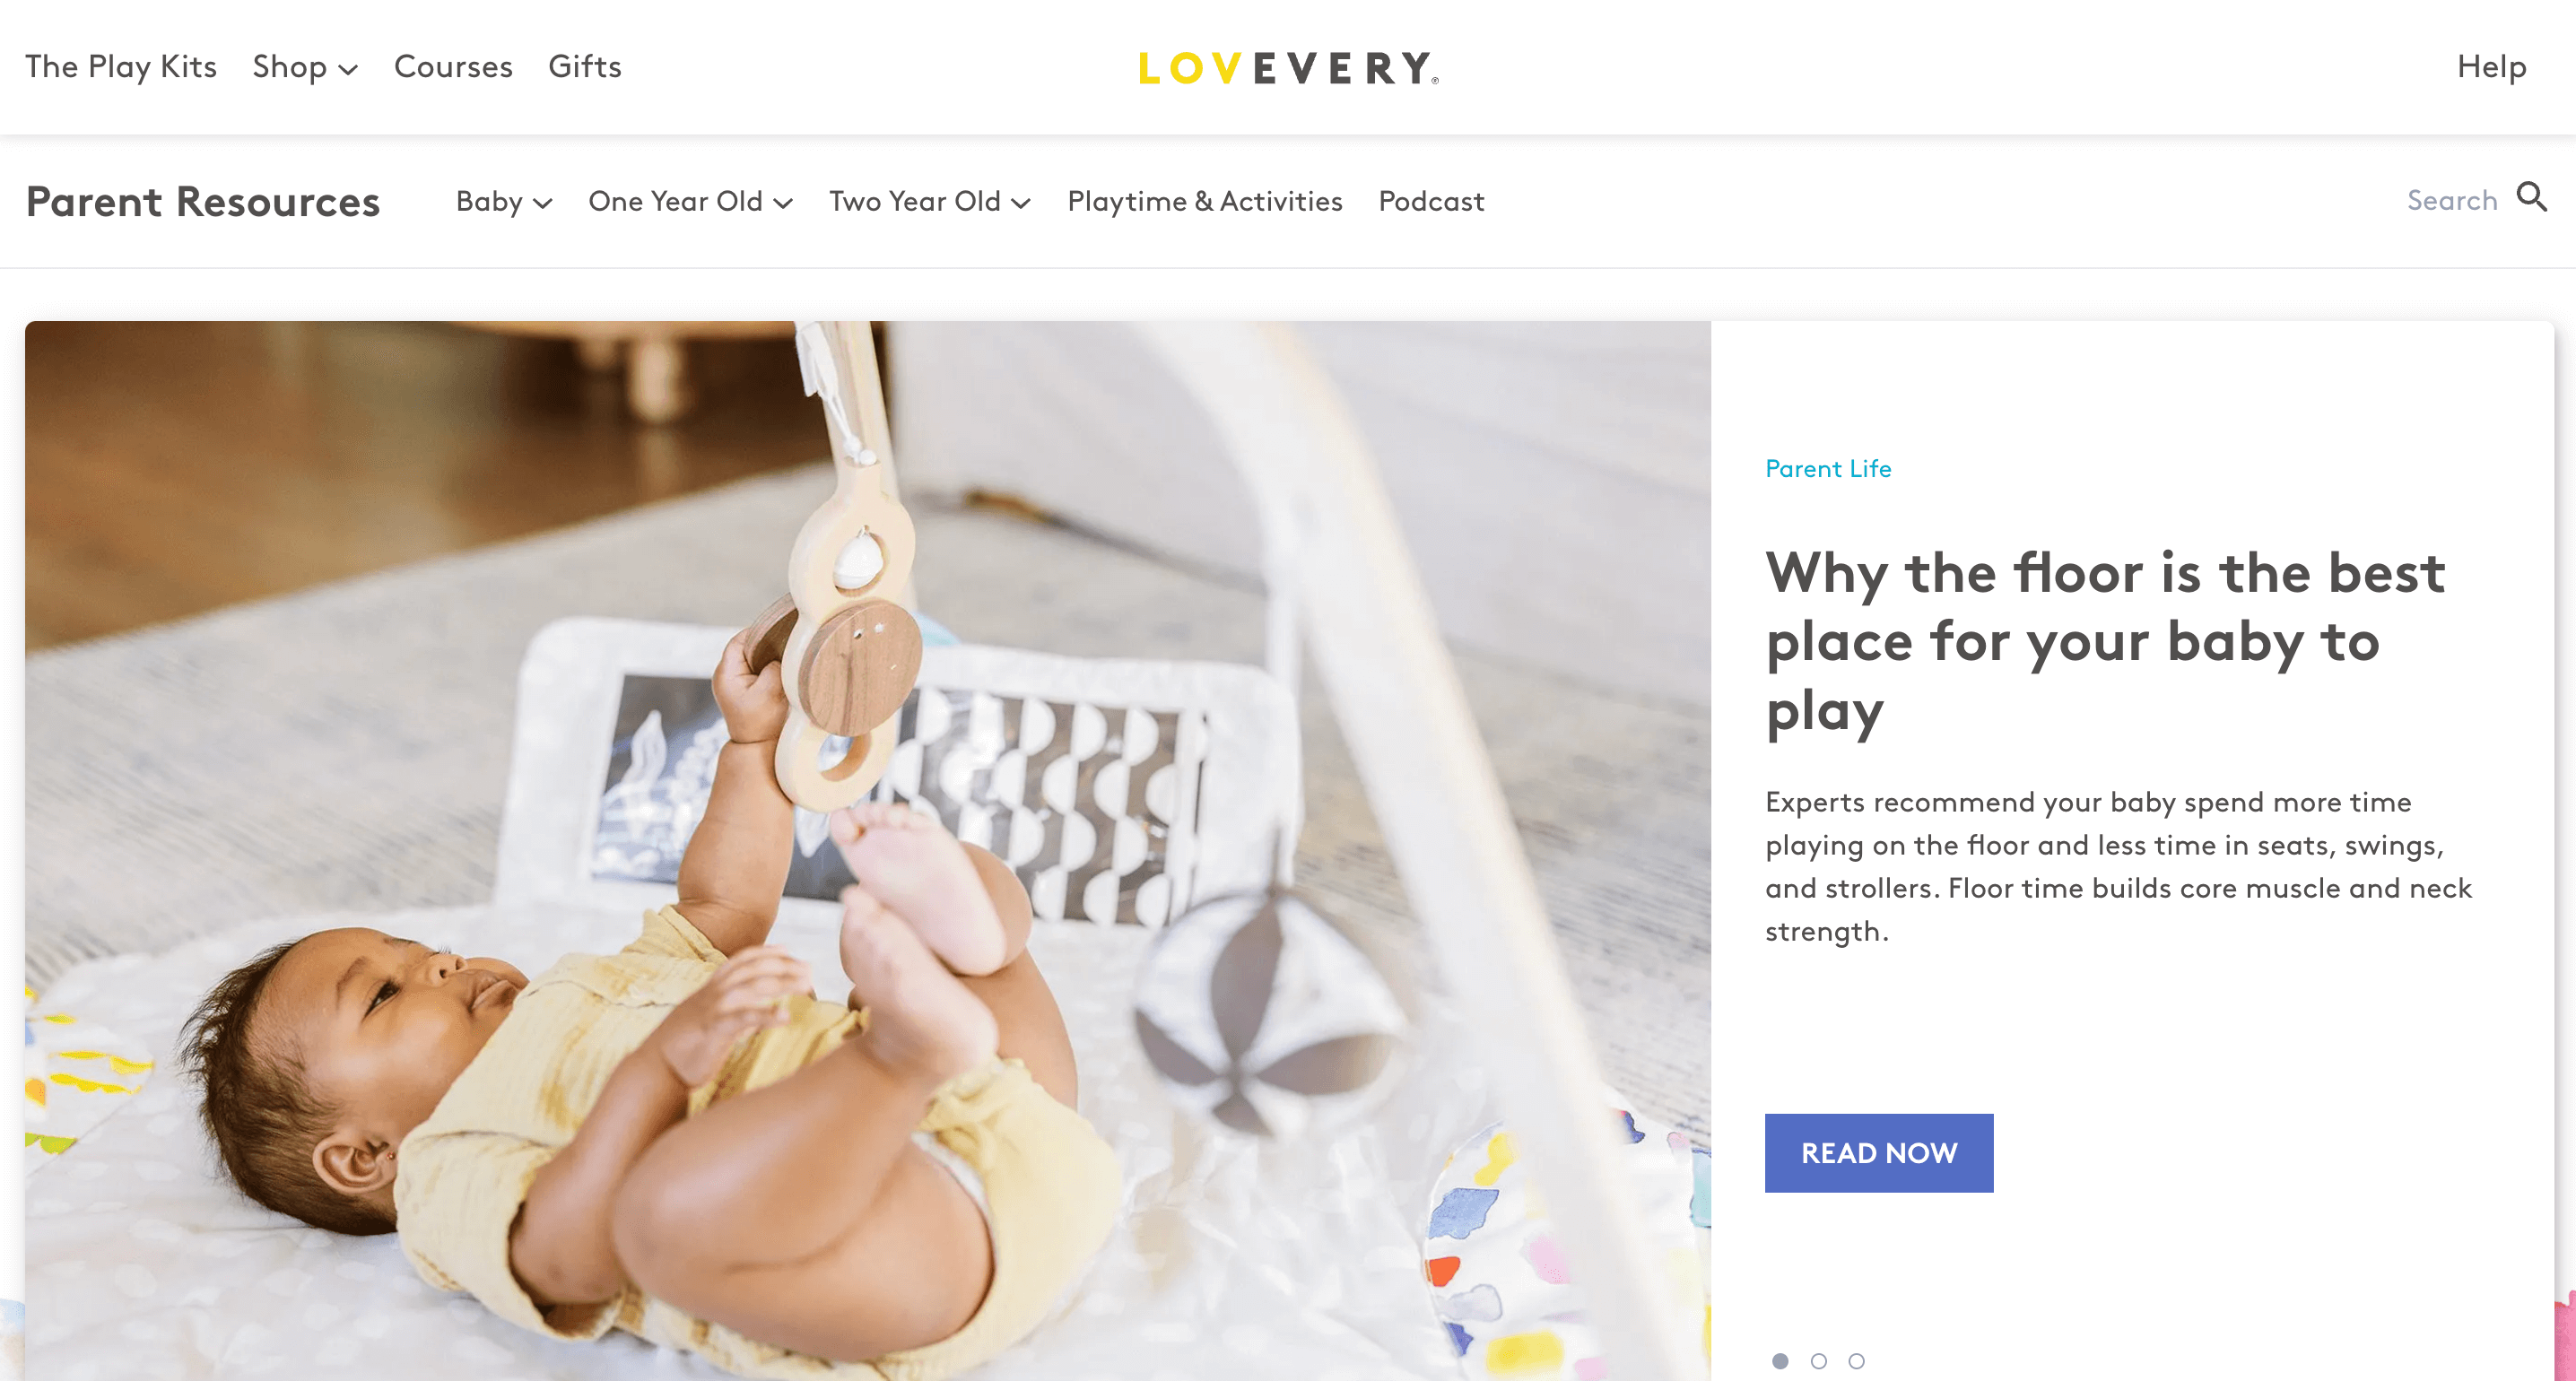 screenshot of ecommerce brand Lovevery blog that provides value to its customers